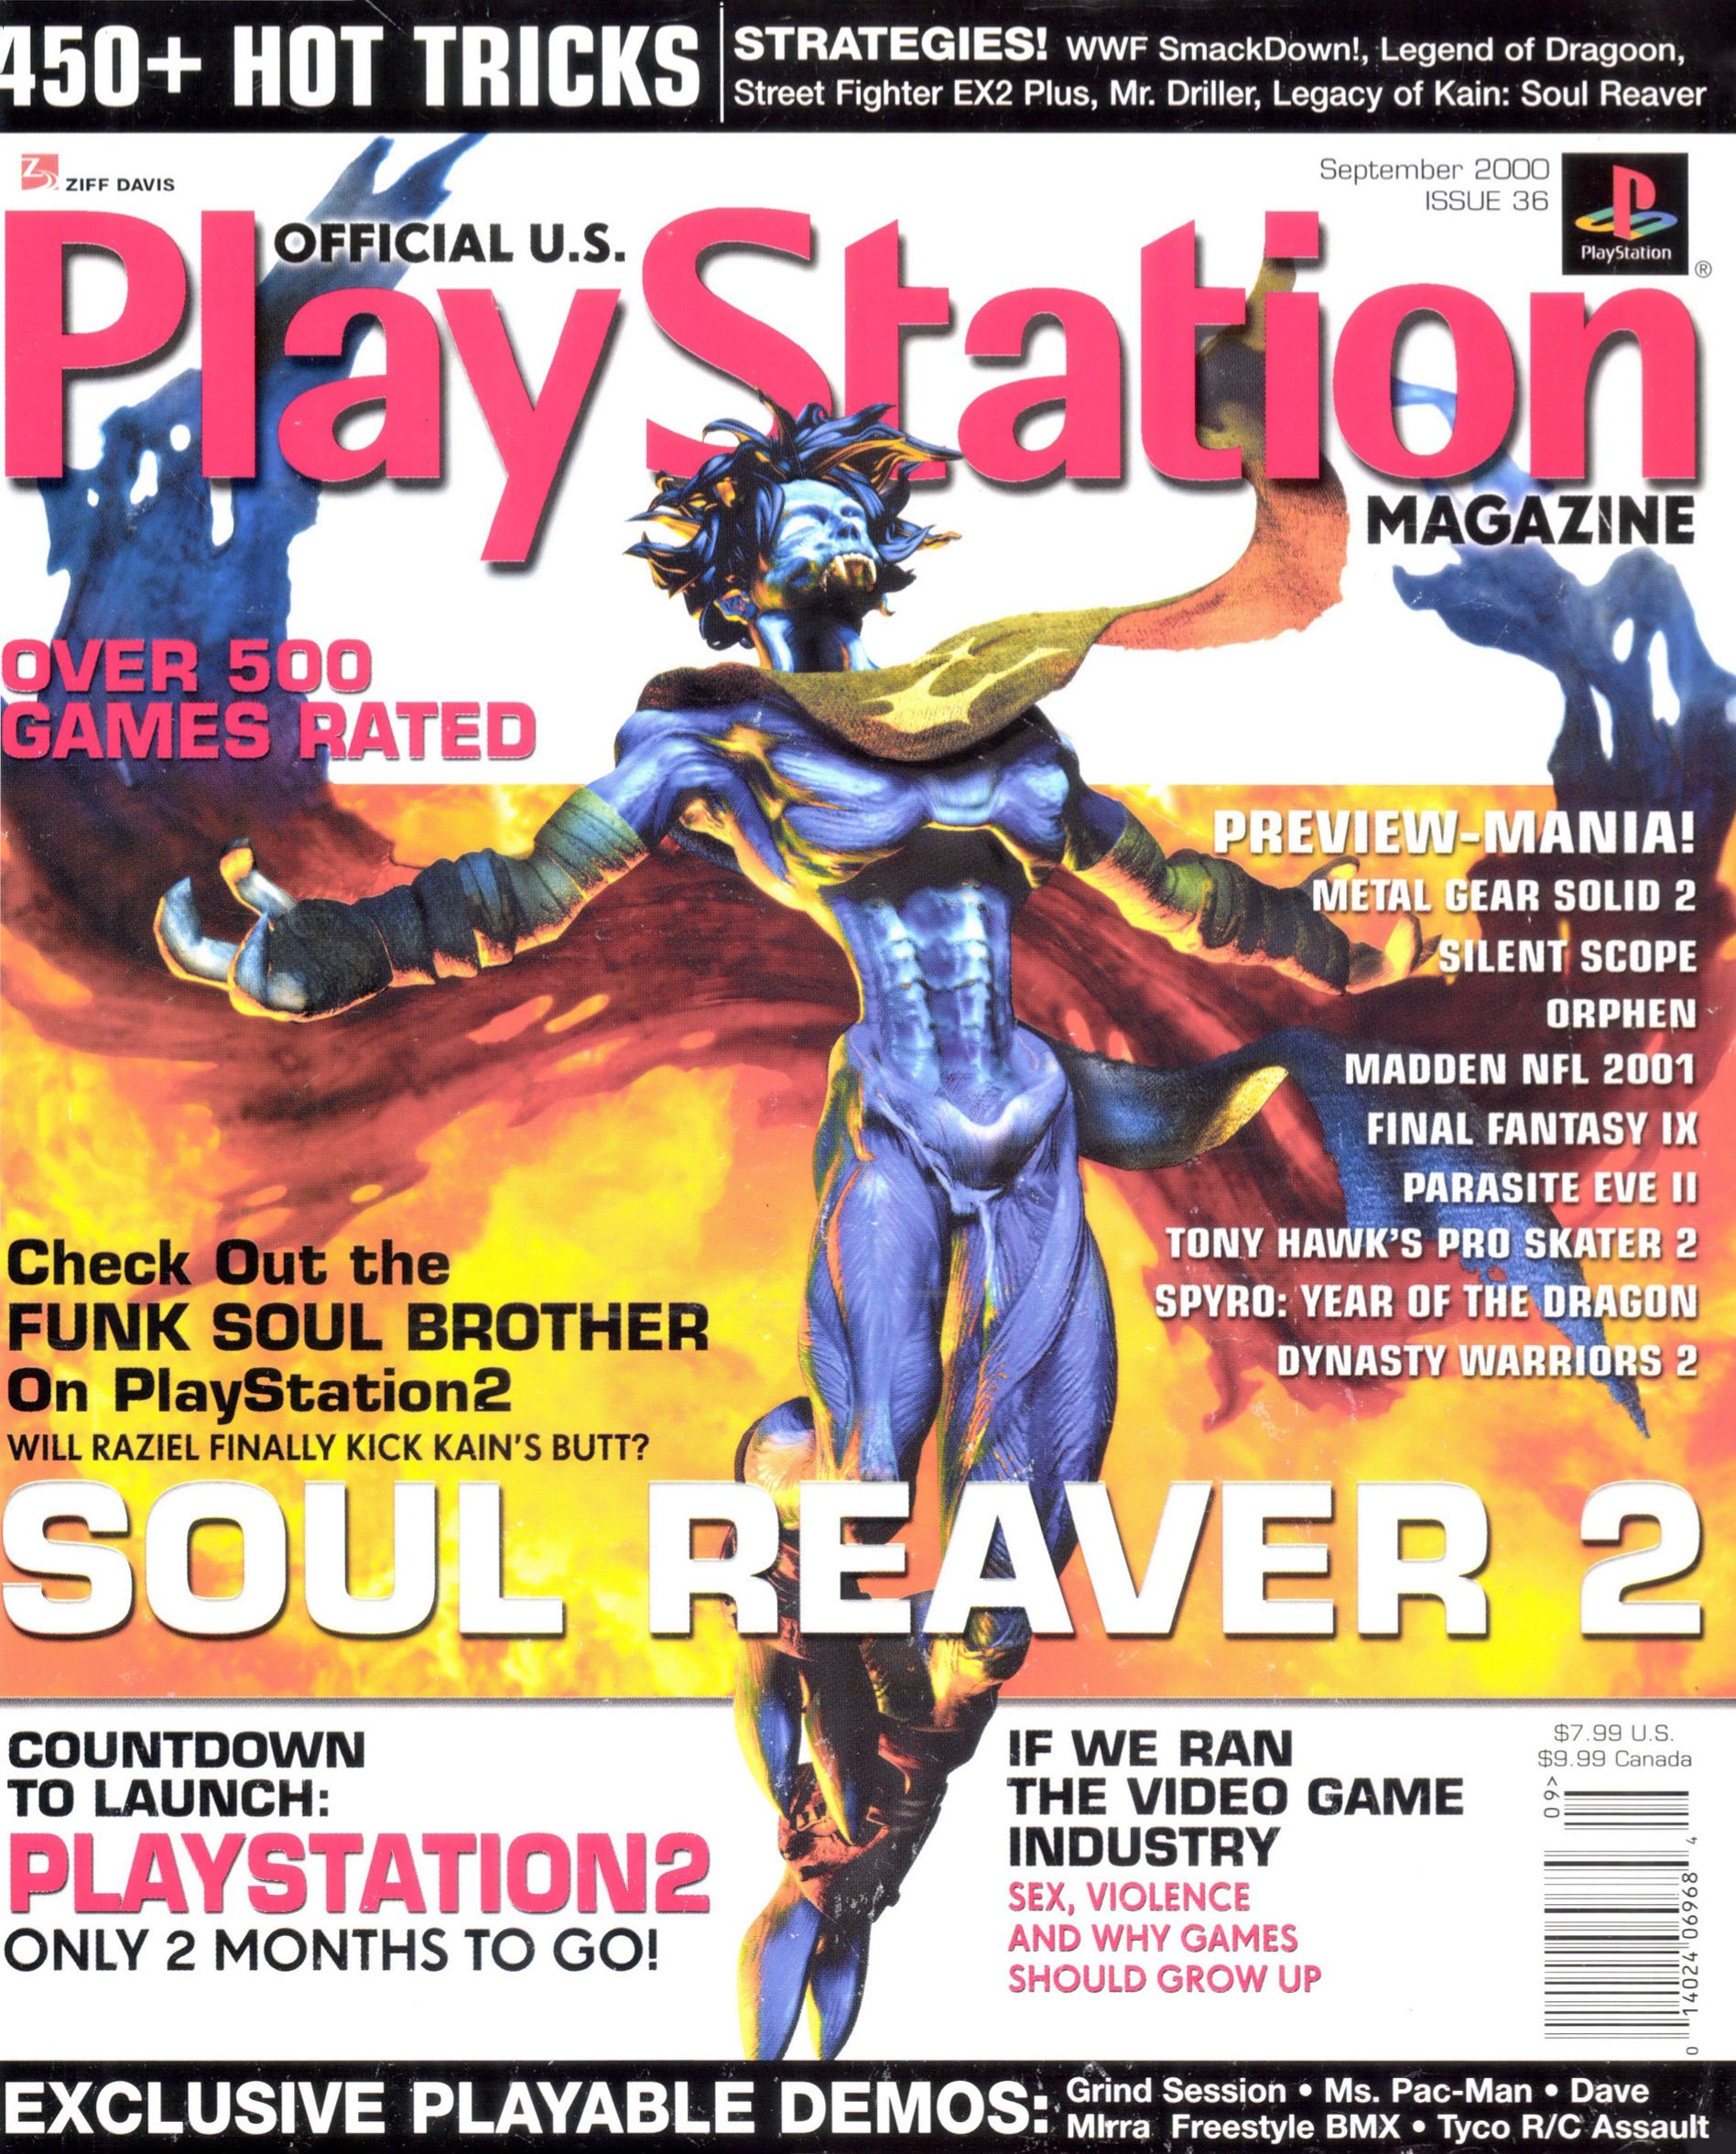 More information about "Official U.S. Playstation Magazine Issue 036 (September 2000)"